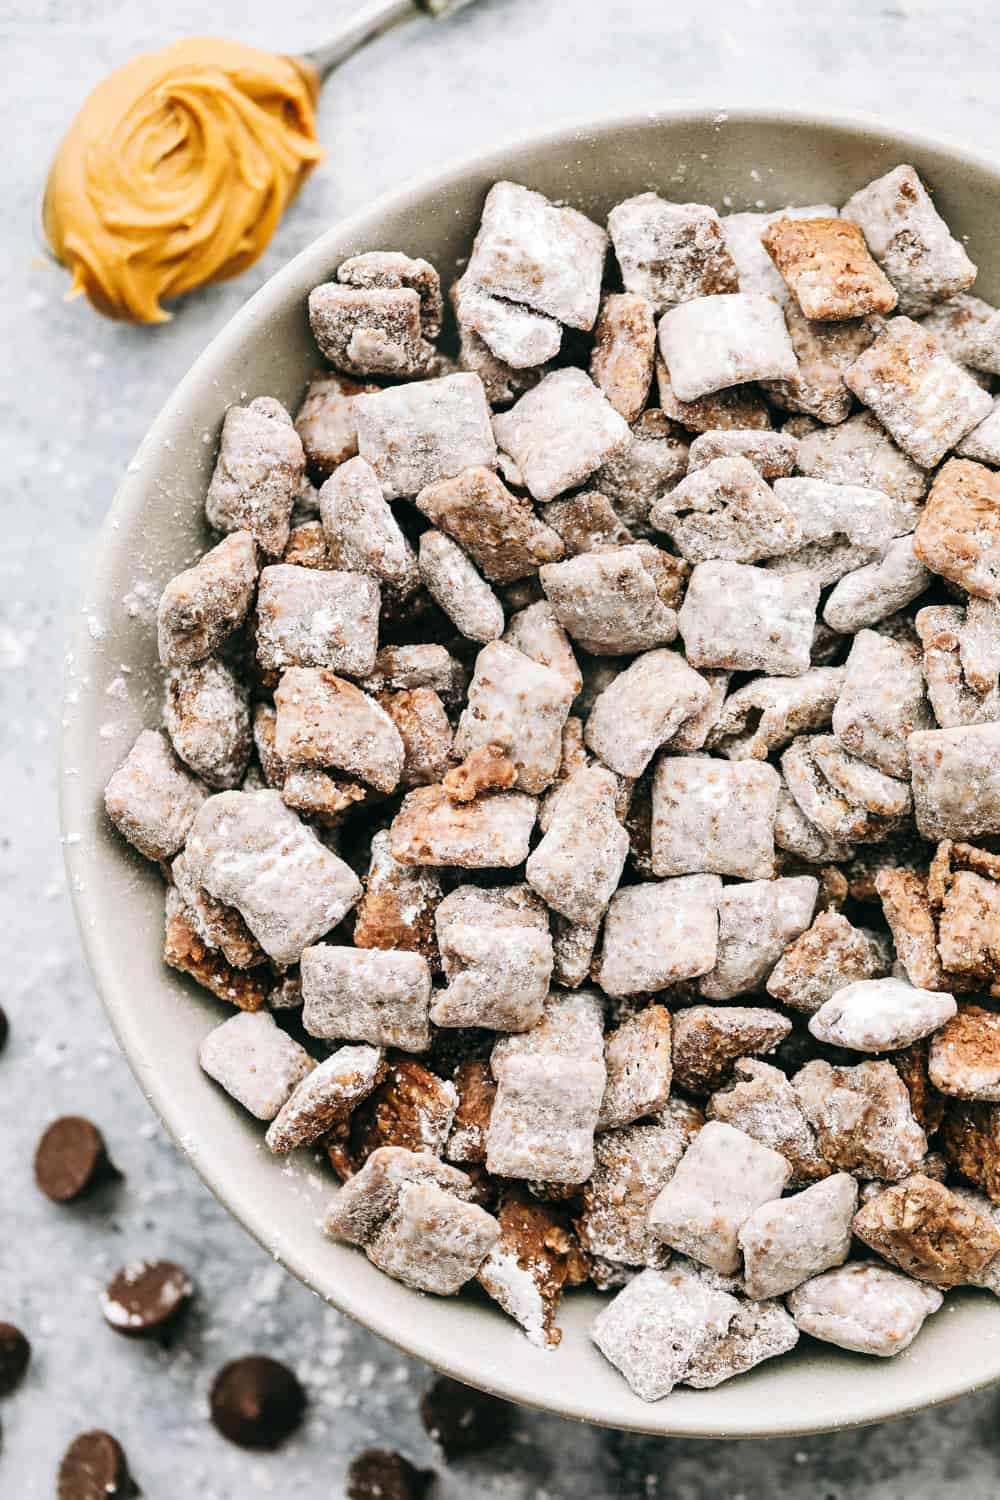 Classic muddy buddies, is cereal mixed with chocolate, peanut butter and powdered sugar.